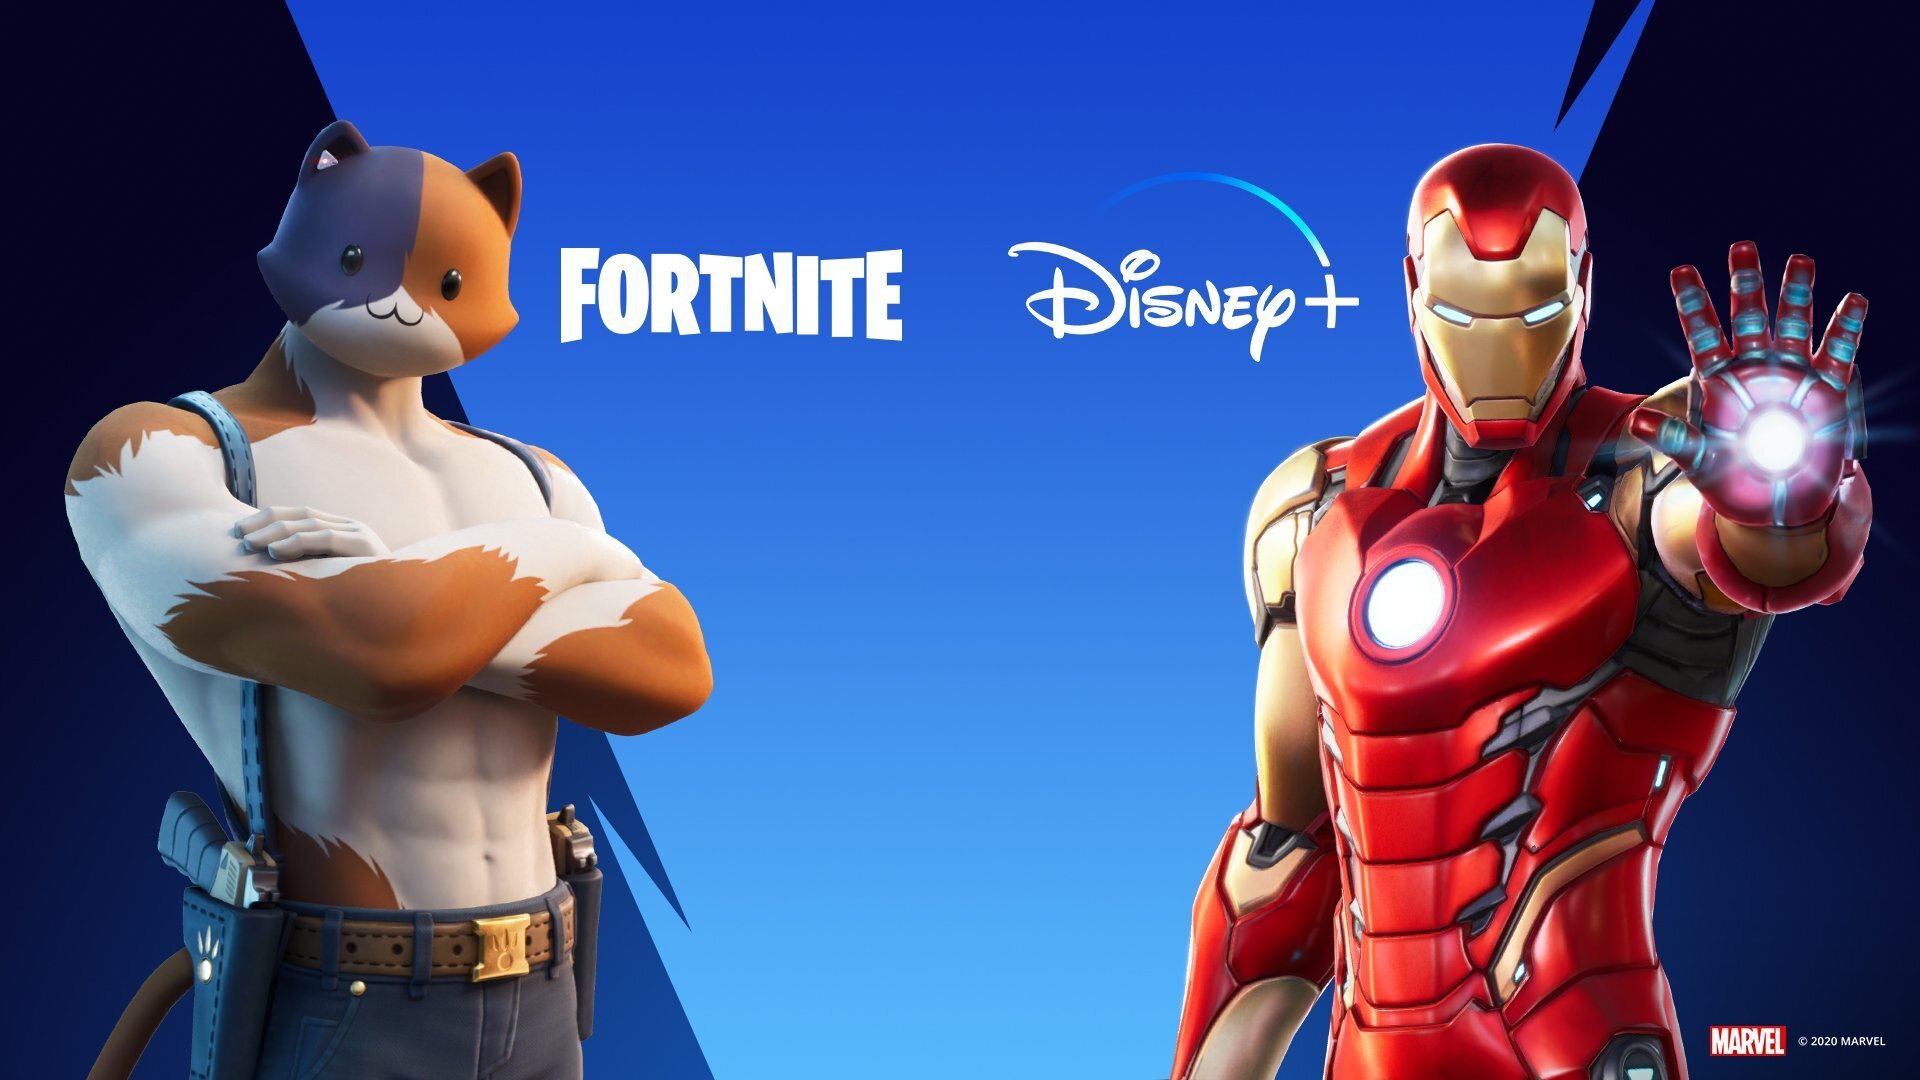 Disney has decided to make an impressive investment in Epic – Disney